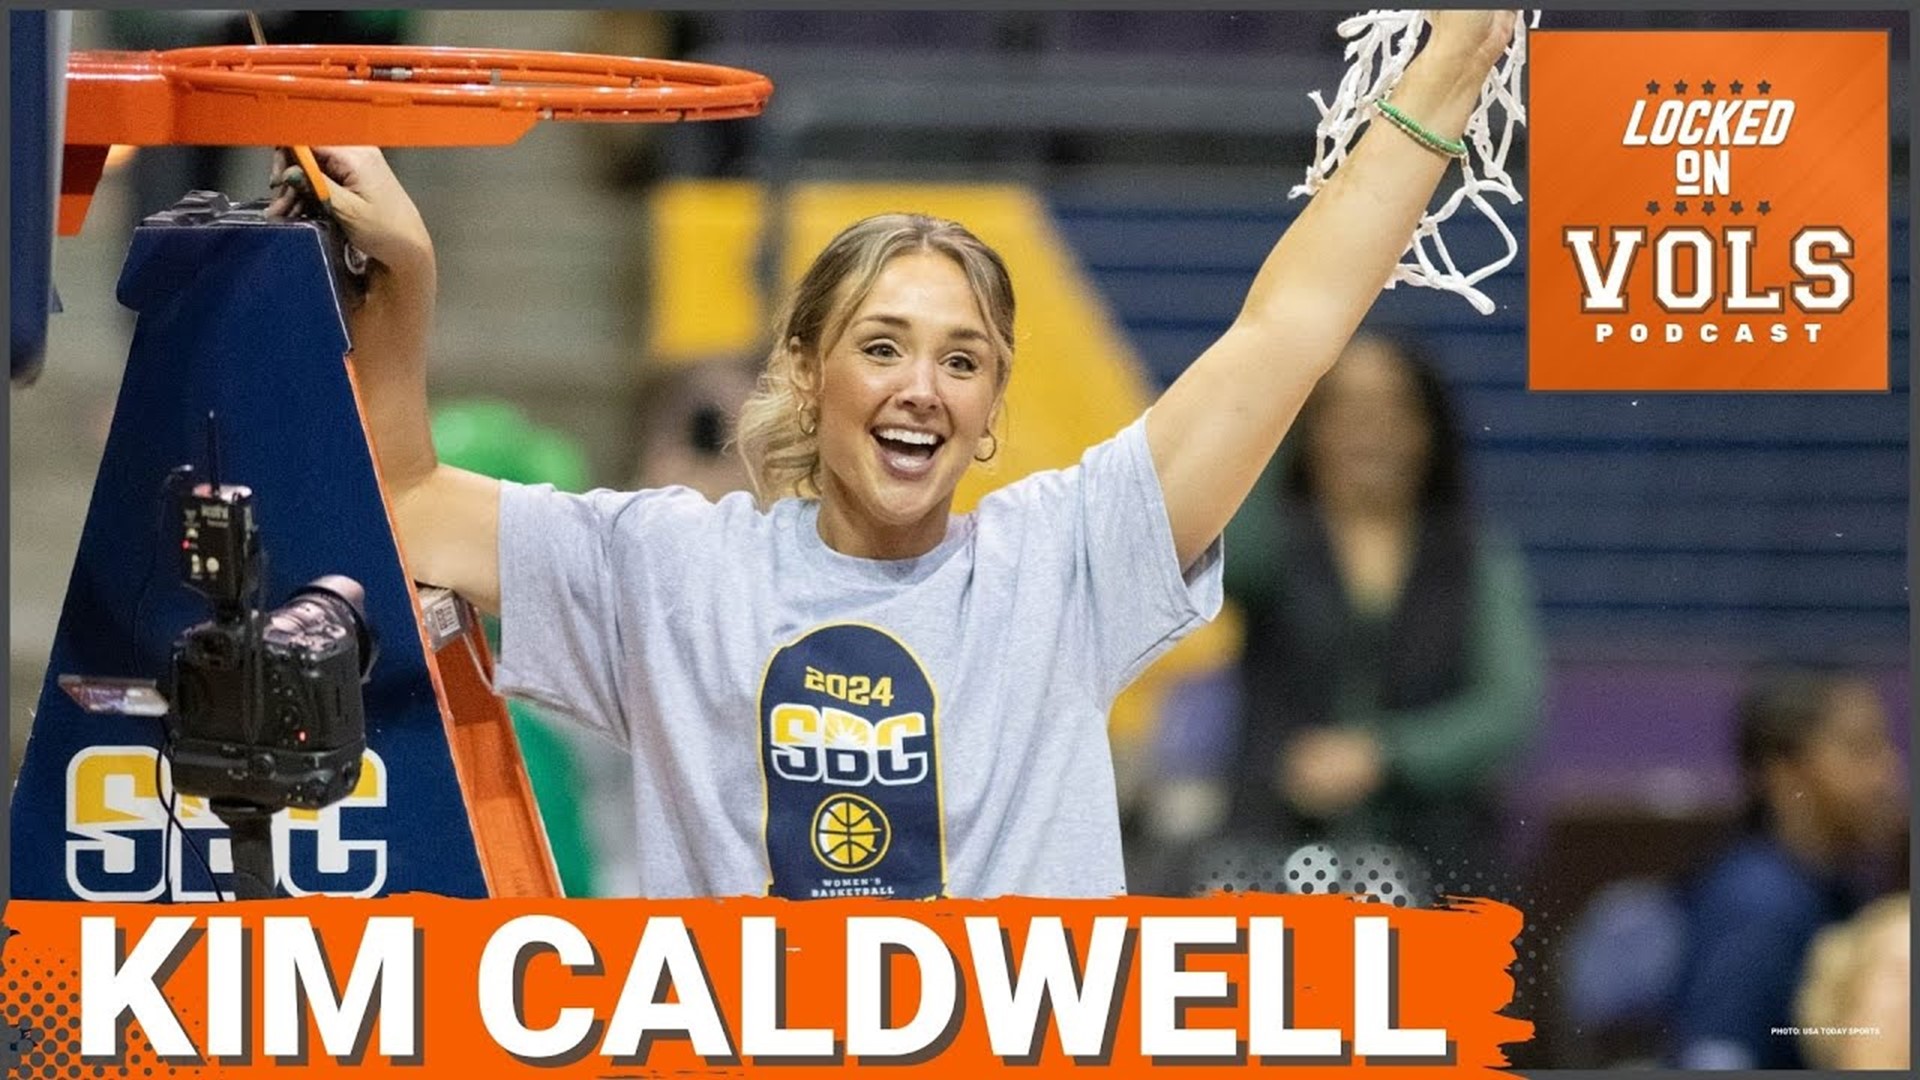 Tennessee Hires Kim Caldwell as Lady Vols Basketball Coach - Has Danny White found another Star?